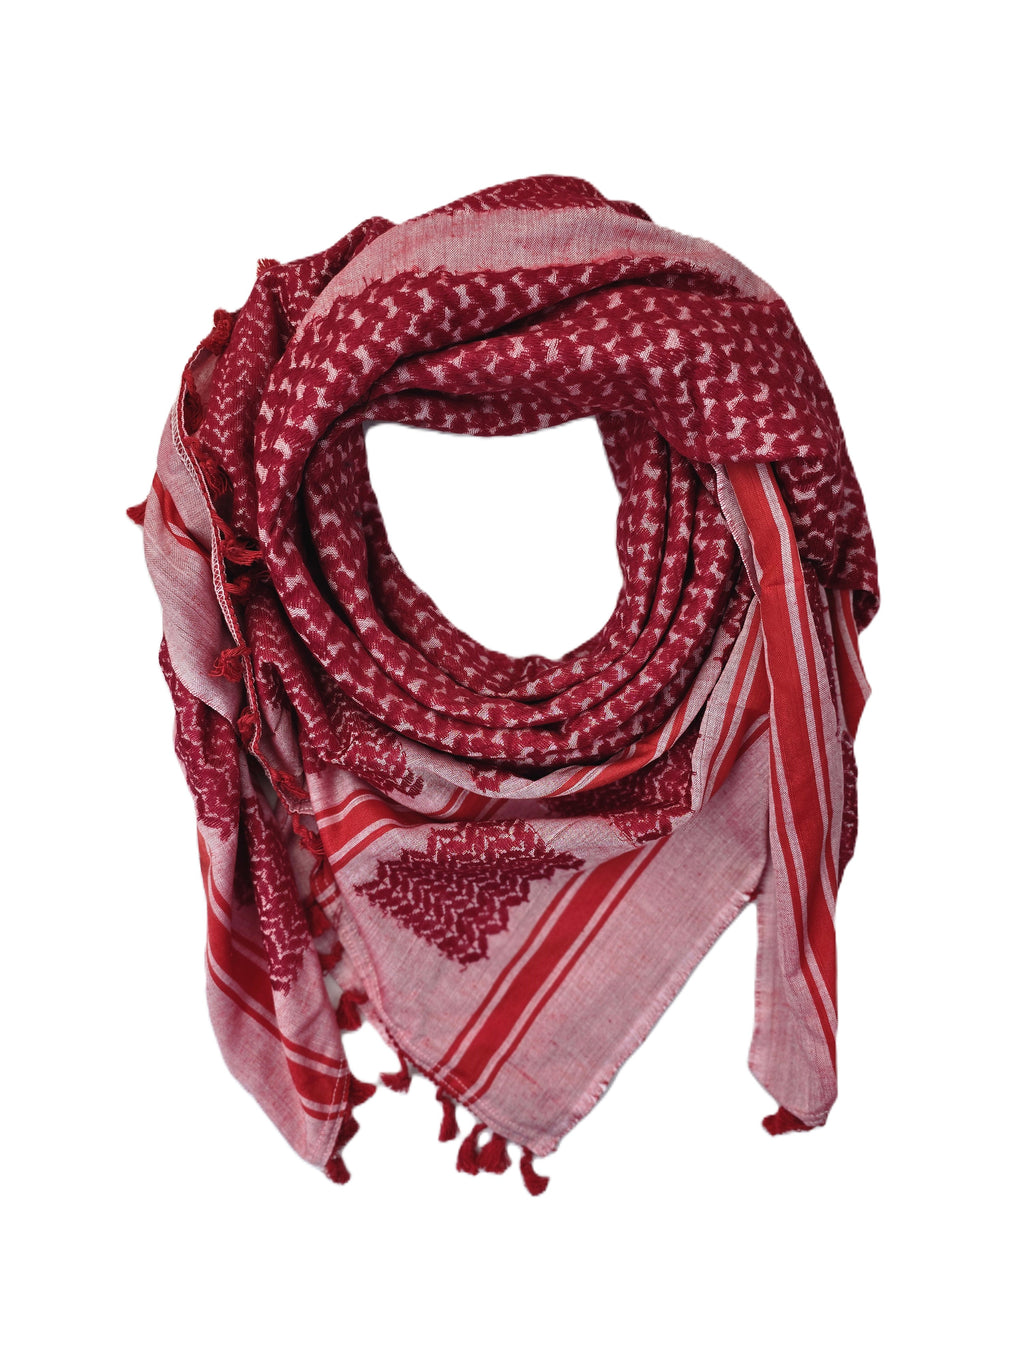 Keffiyeh Scarf Made in Palestine - Red and Pink